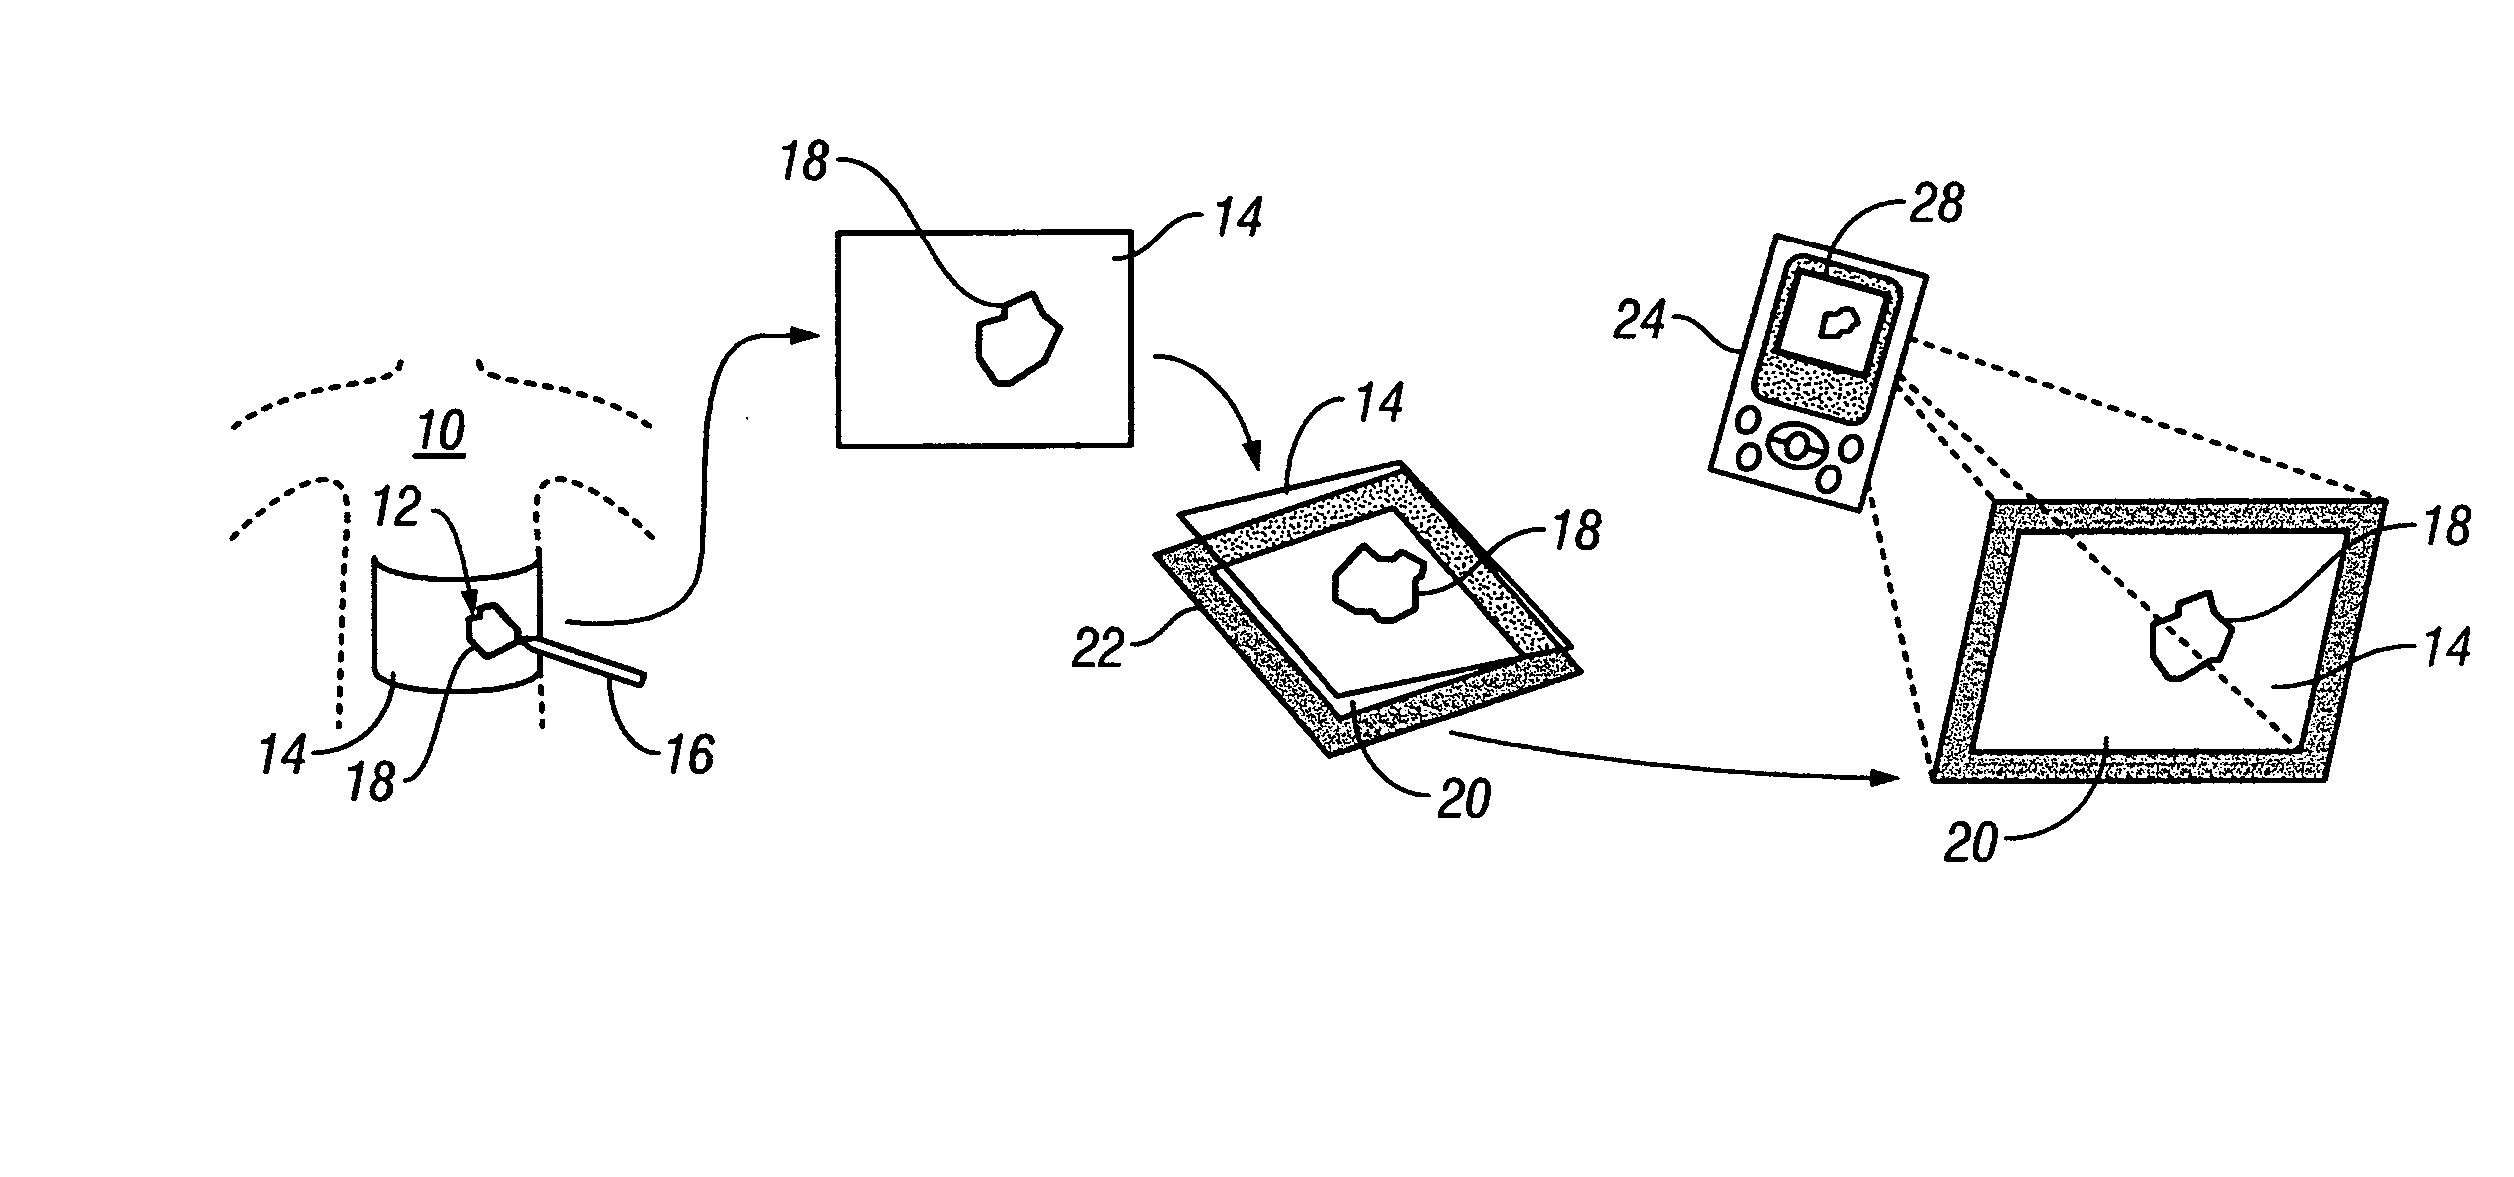 System and method for tracking healing progress of a wound